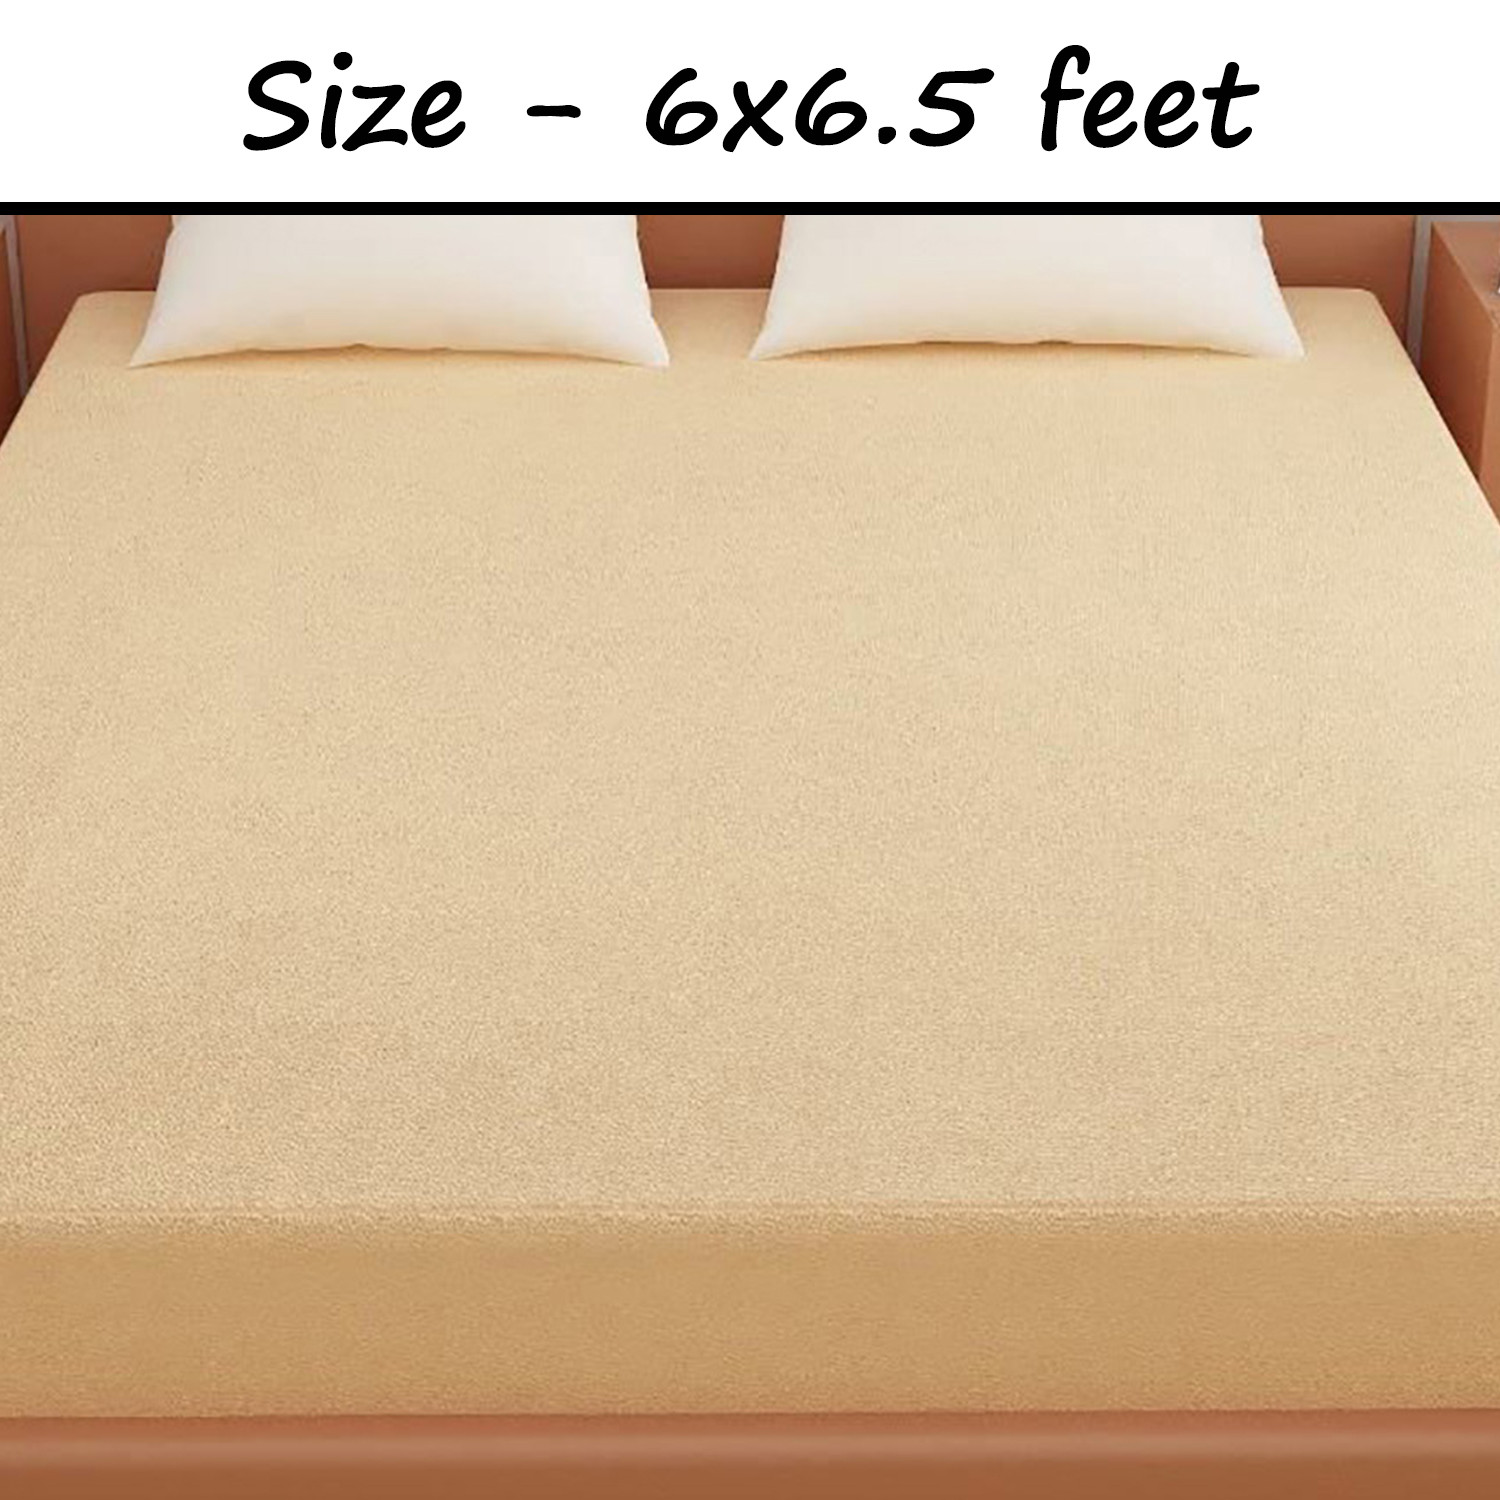 Kuber Industries Waterproof Double Bed Mattress Cover|Breathable Terry Cotton Surface & Elastic Fitted Mattress Protector,6 x 6.5 Ft. (Beige)